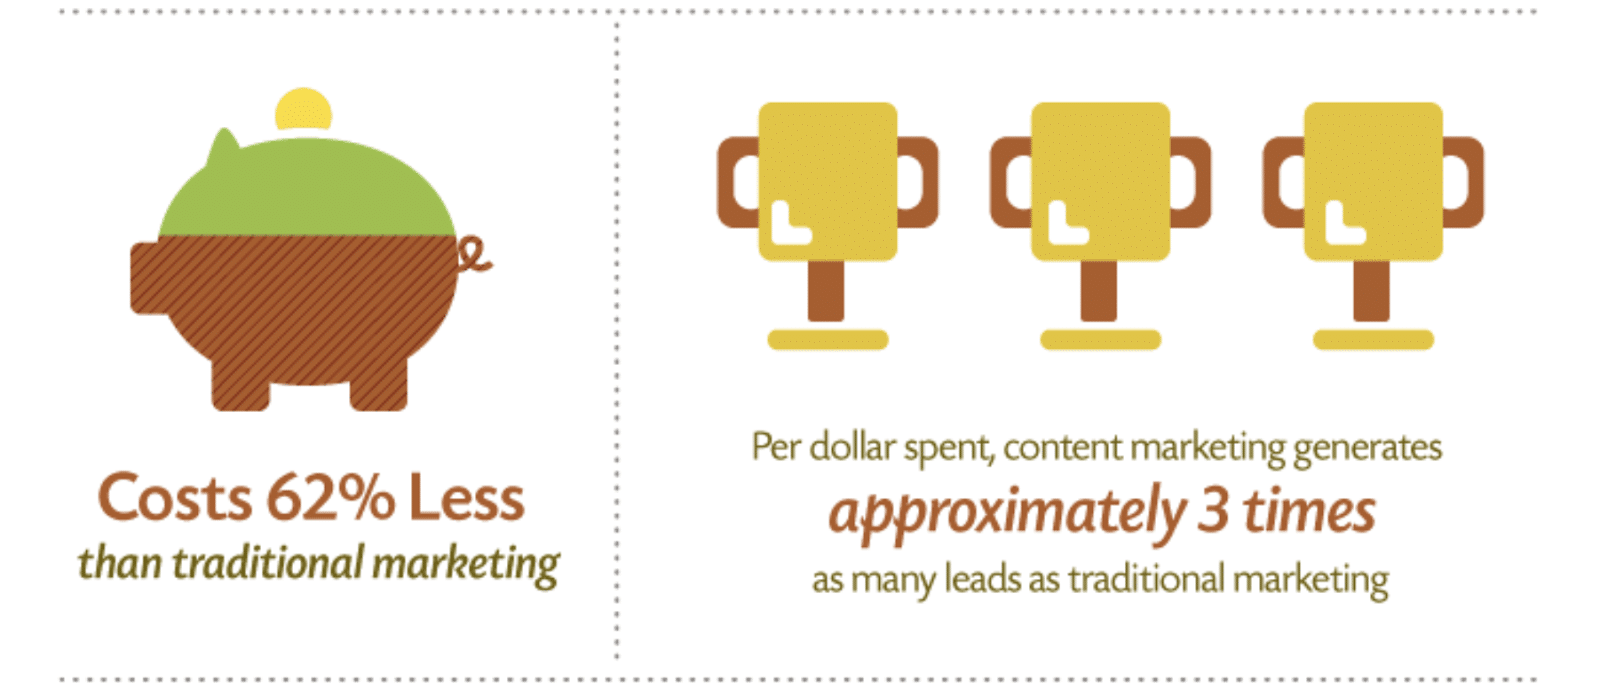 costs 62% less than other traditional types of marketing and generates on average 3 times the amount of leads.